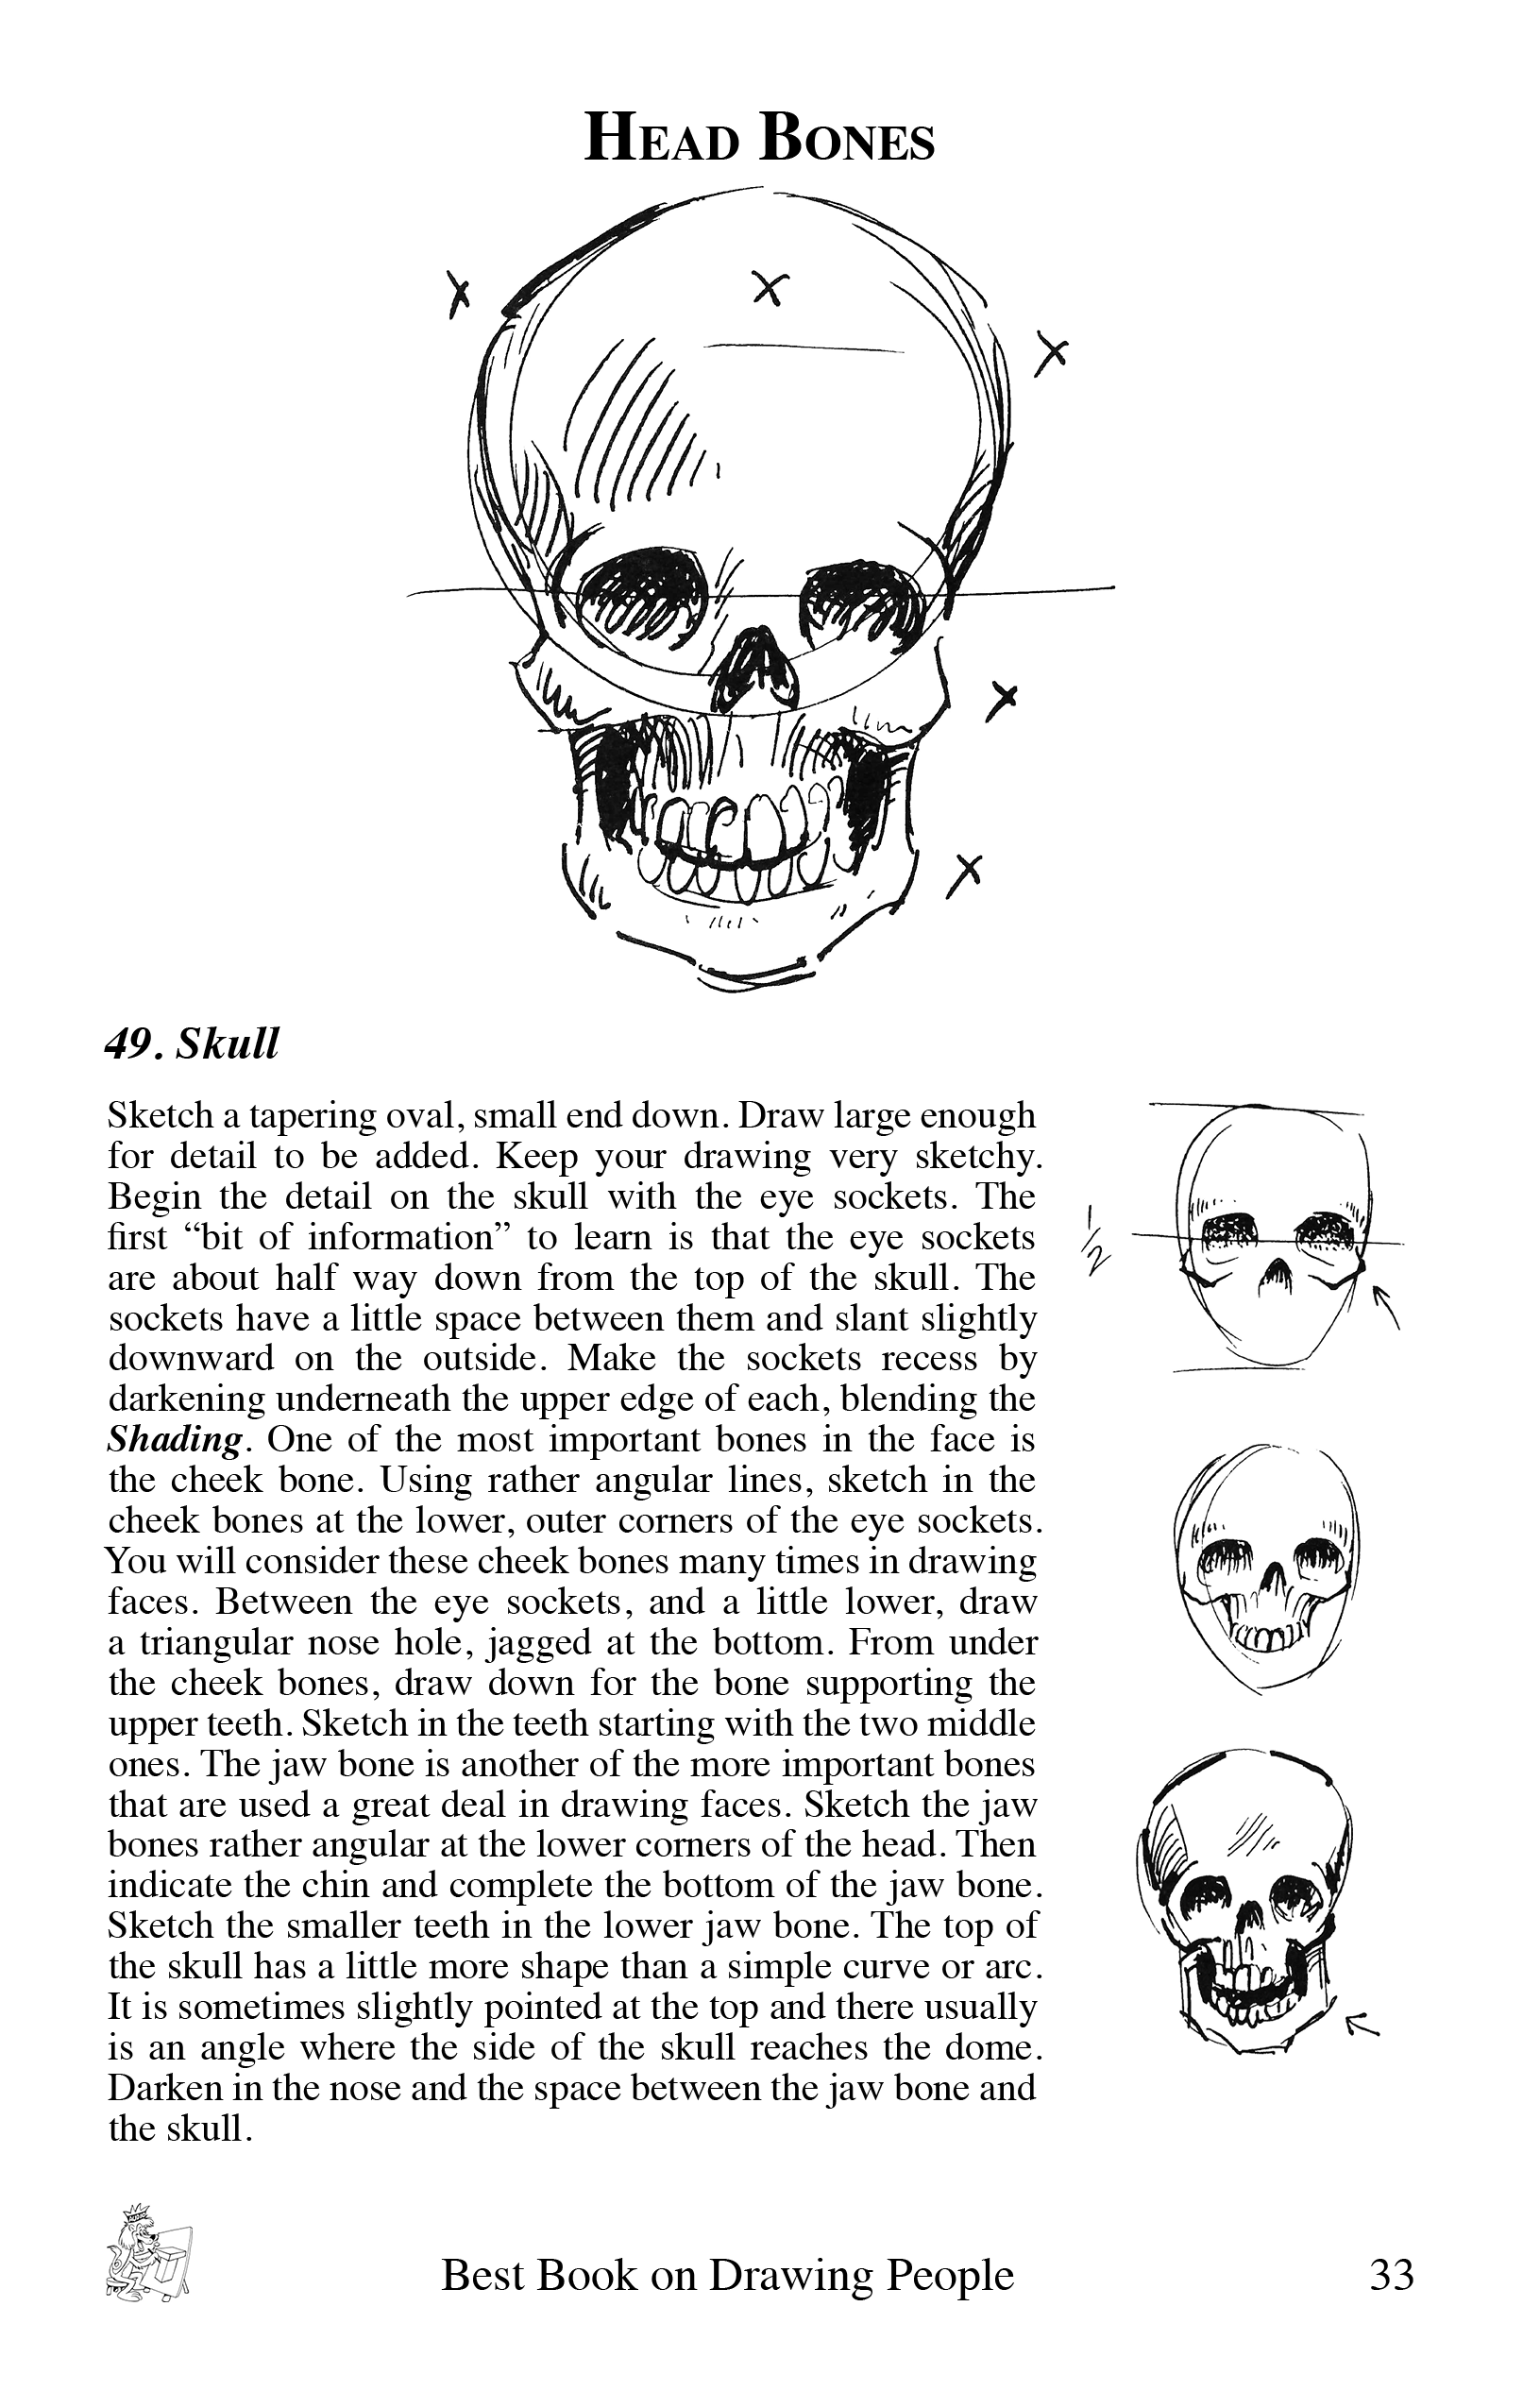 Head Bones sample page from the book Best Book on Drawing People by Bruce McIntyre